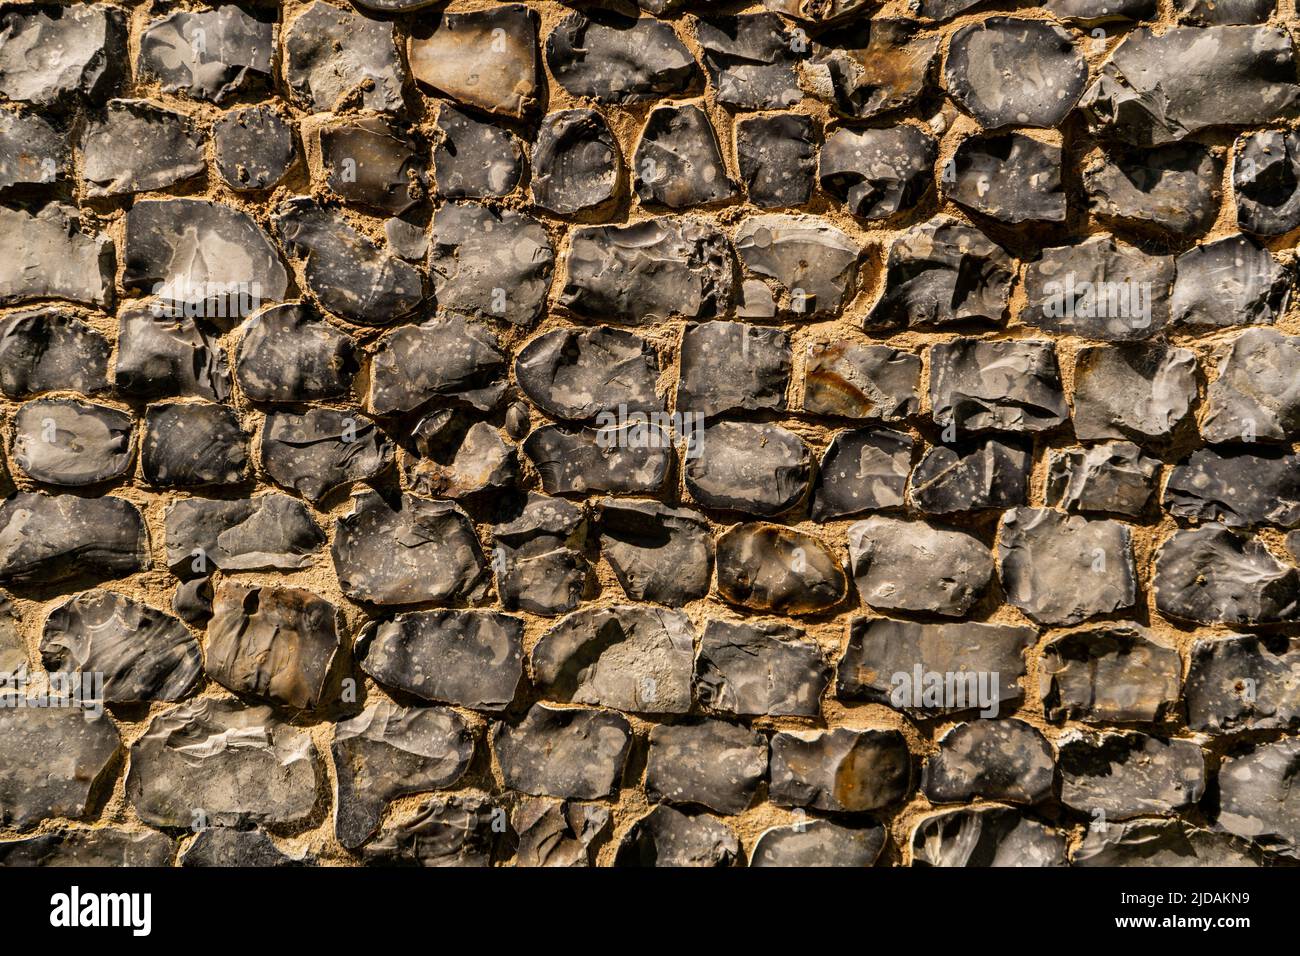 View of a big wall made of flint stones, building material in architecture used in UK. Flint is the hardest of building stones, used by the Romans for Stock Photo